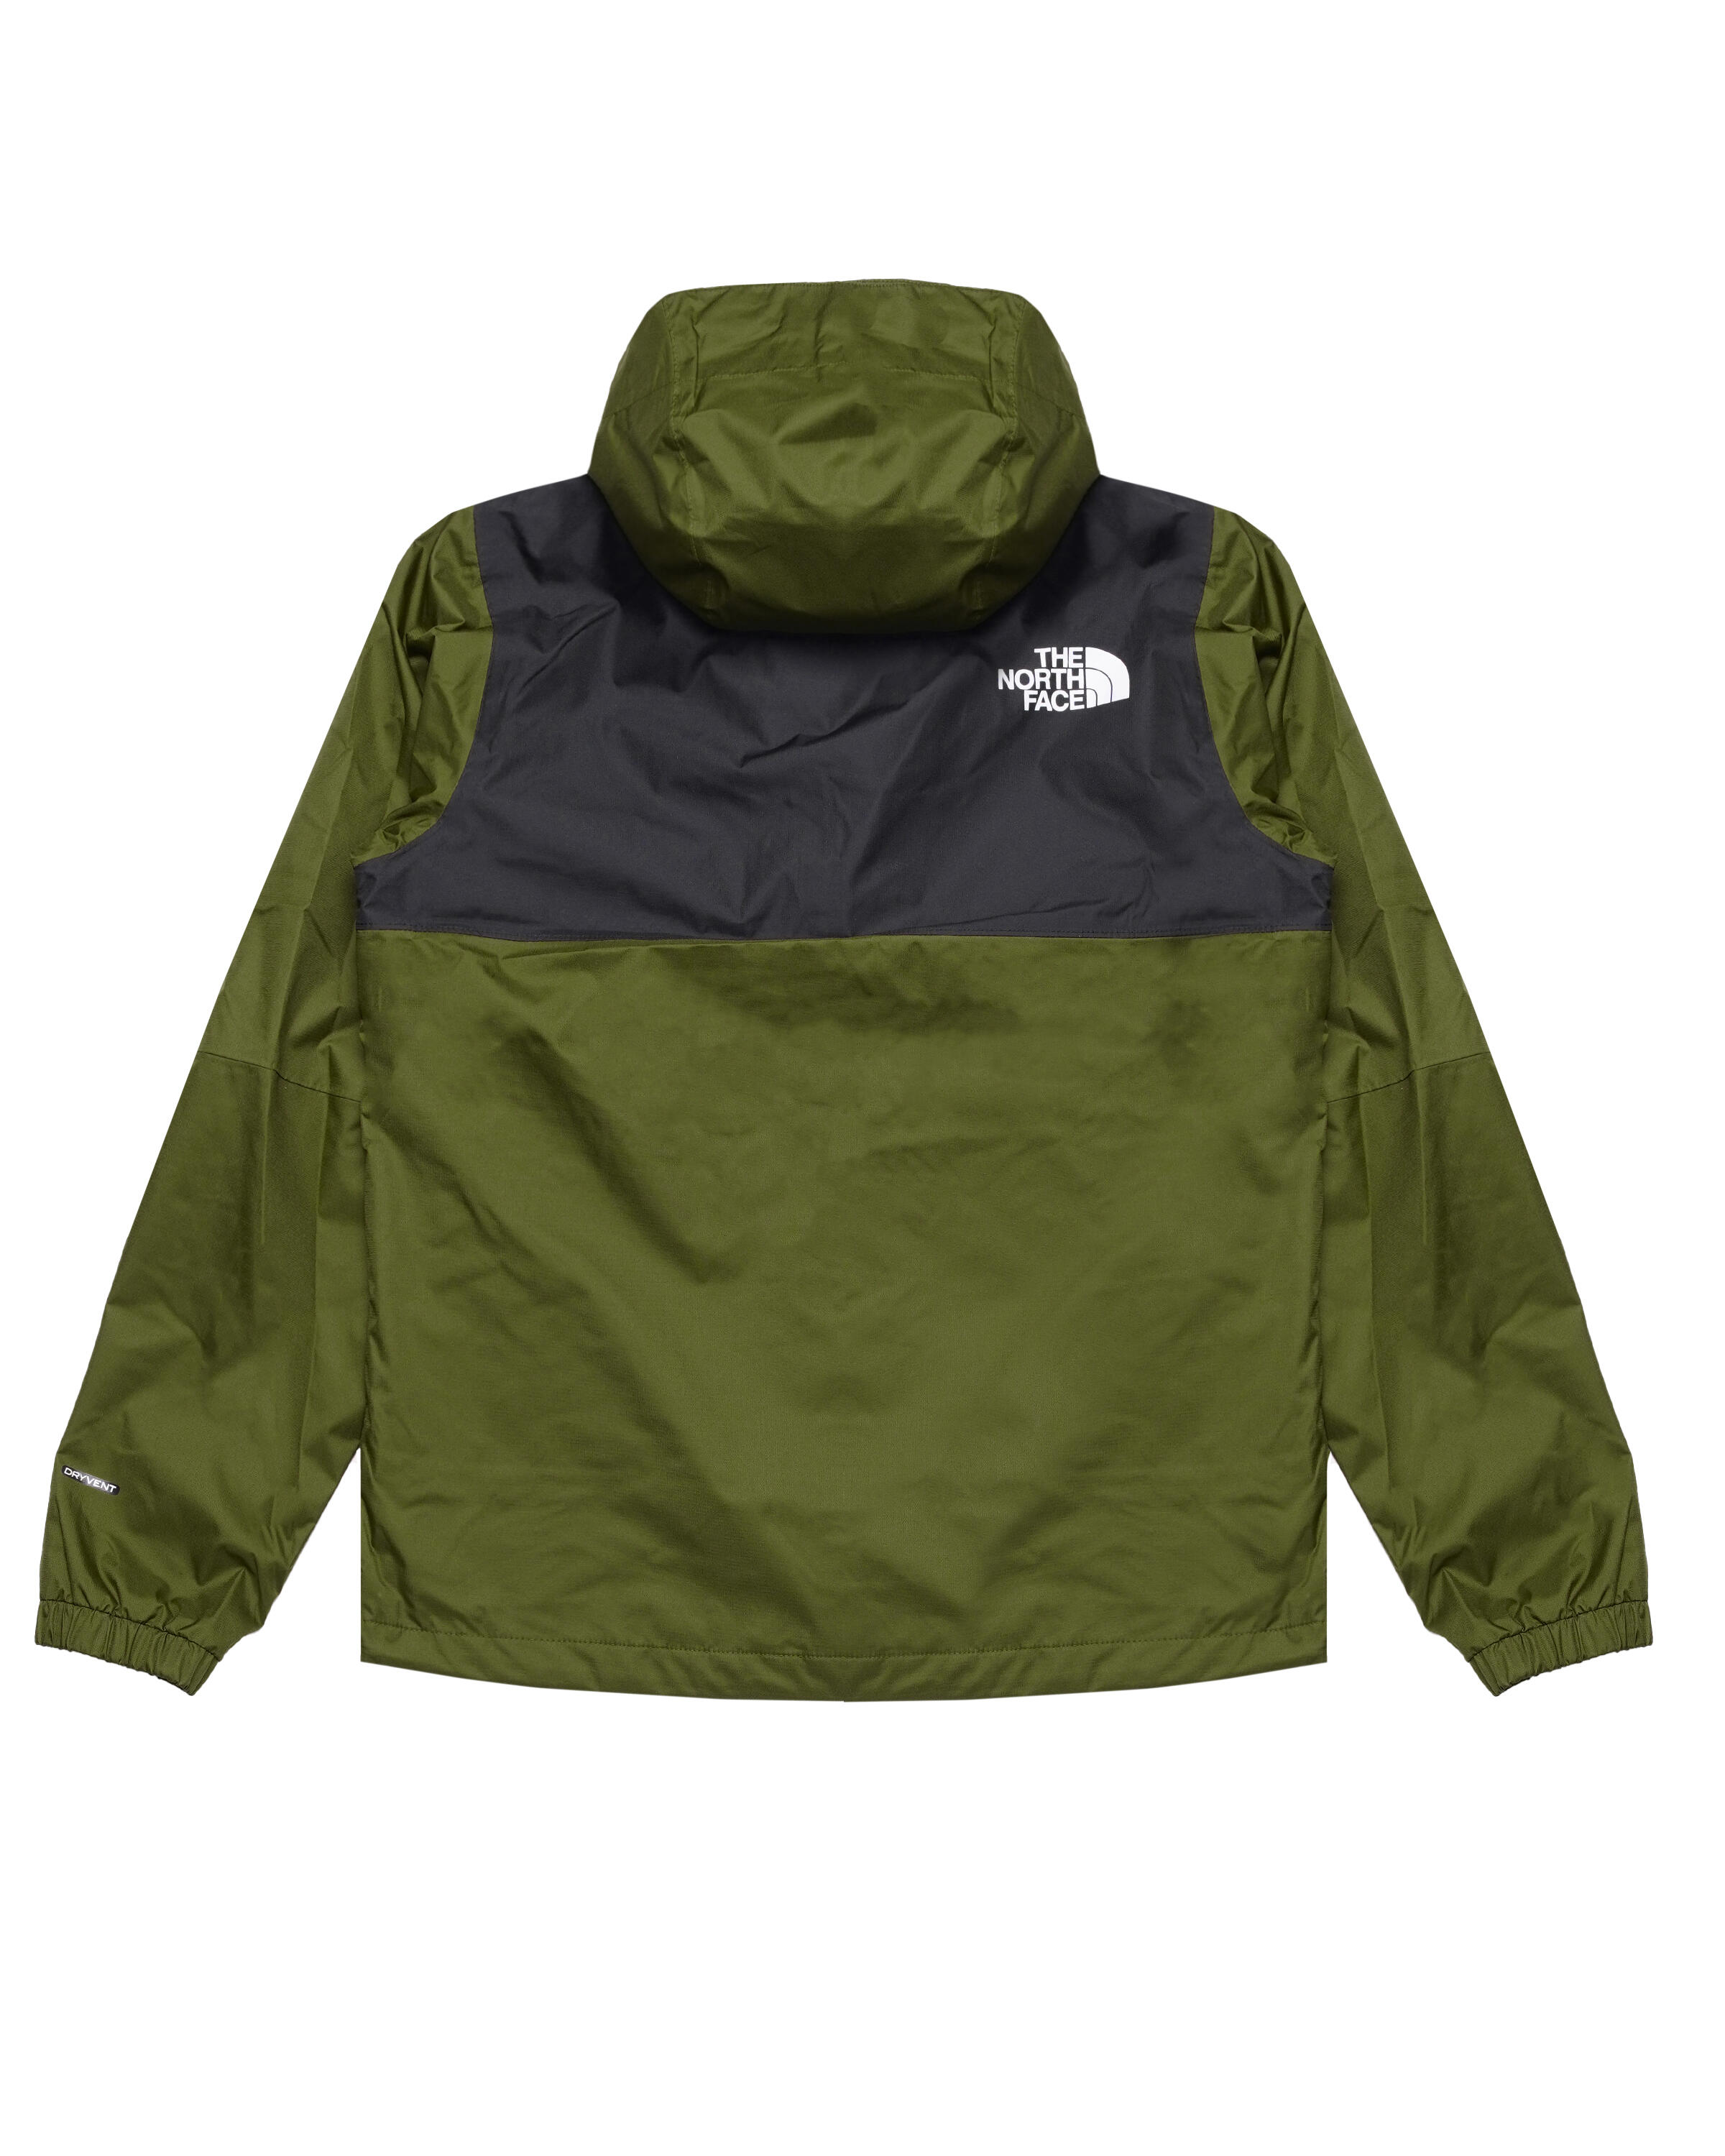 The North Face MOUNTAIN Q JACKET